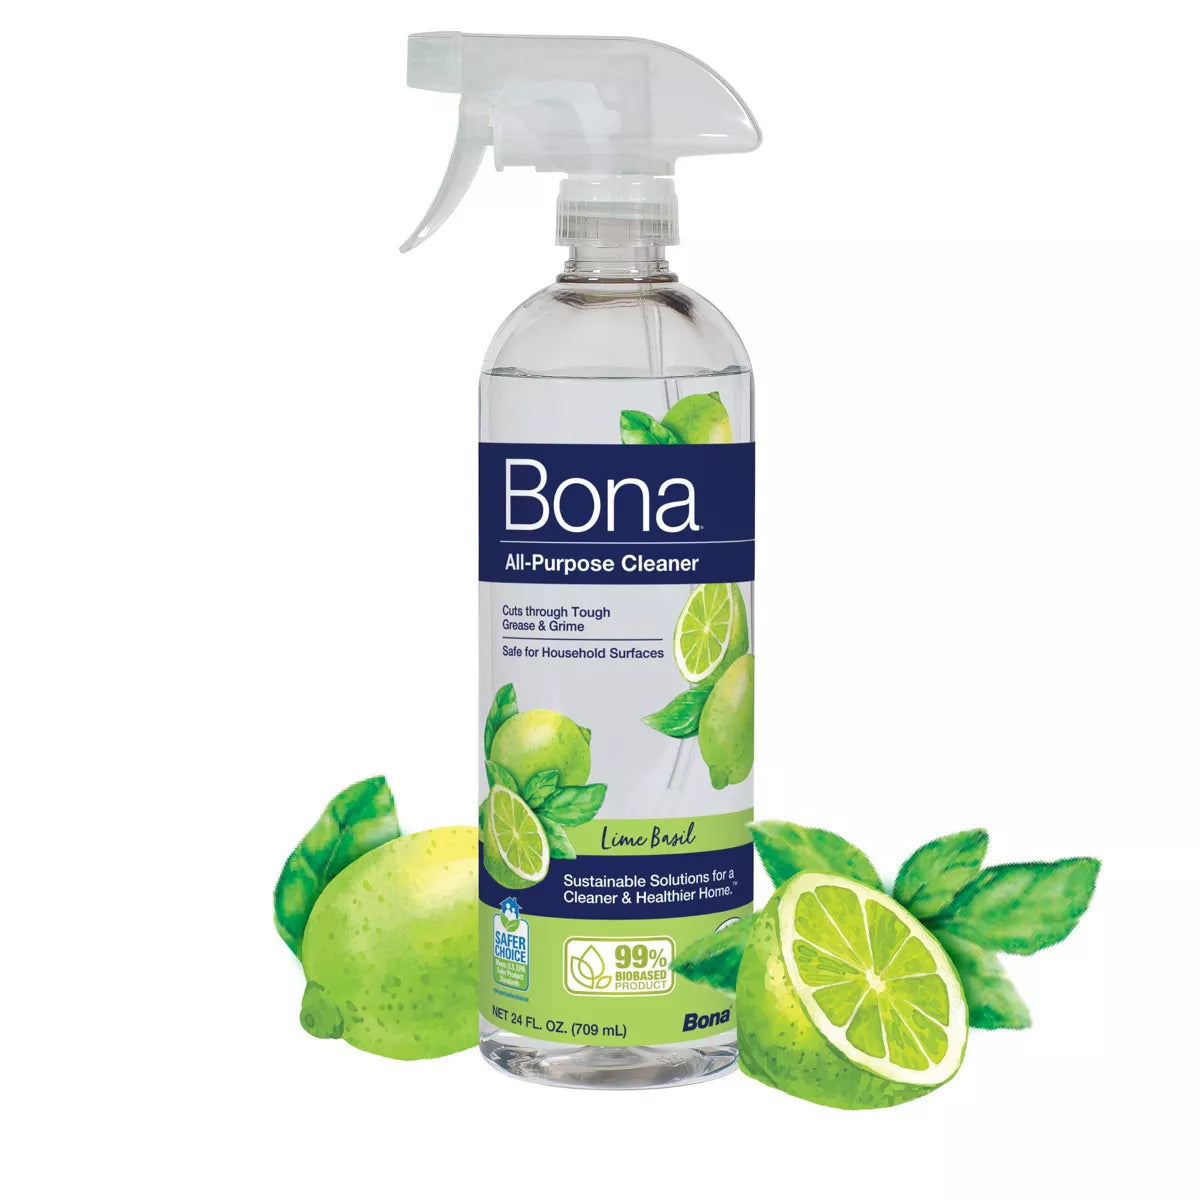 Bona Lime Basil Cleaning Products Multi Surface All Purpose Cleaner Spray - 24 fl oz